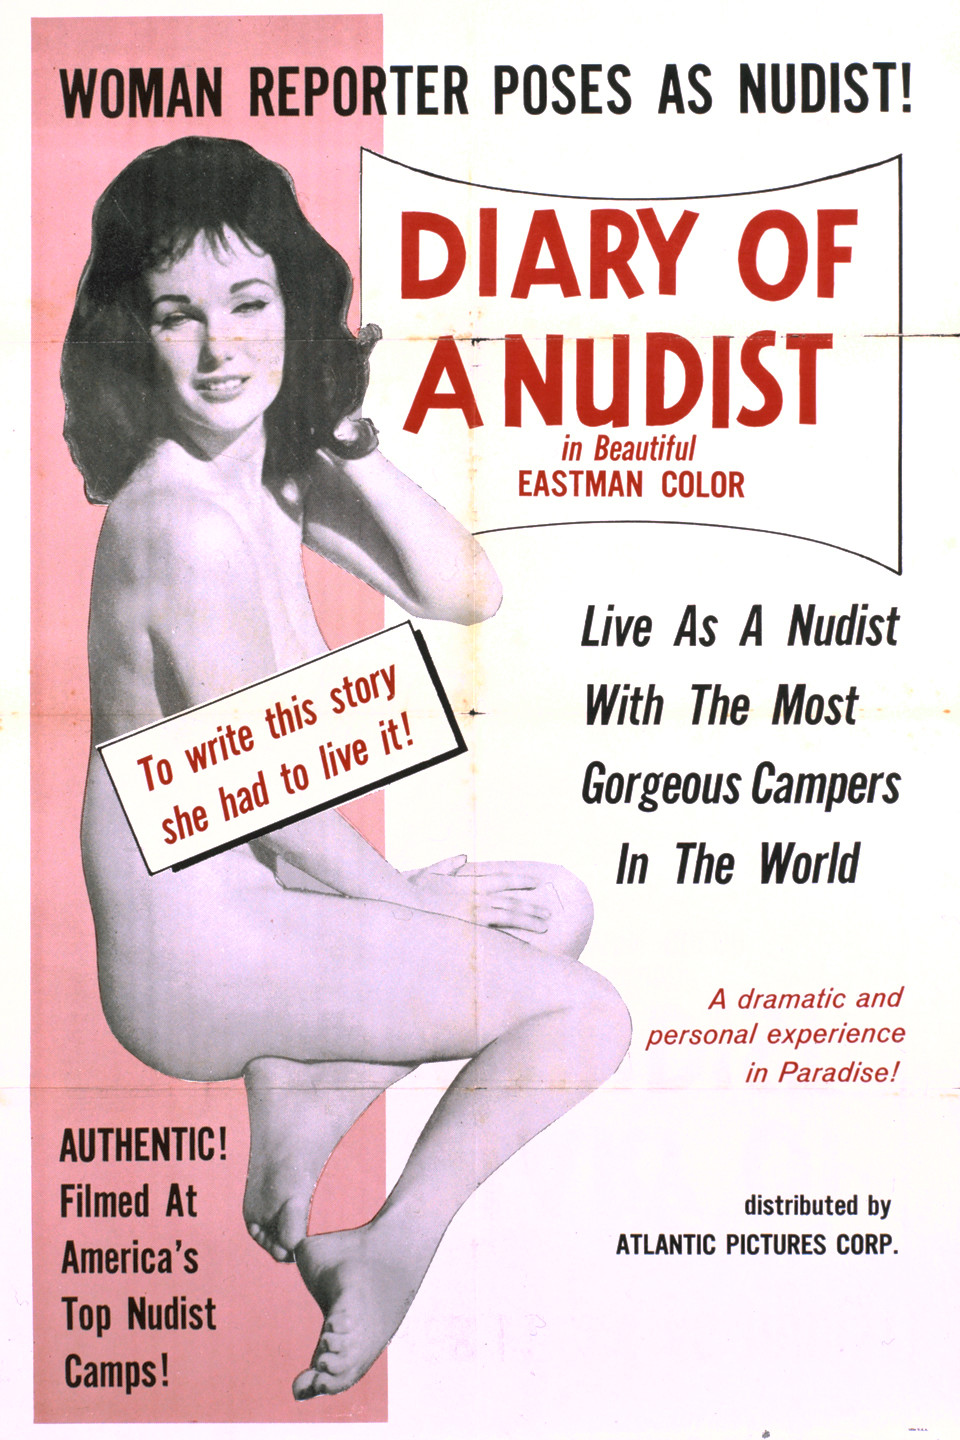 chris ashanti recommends diary of a nudist pic